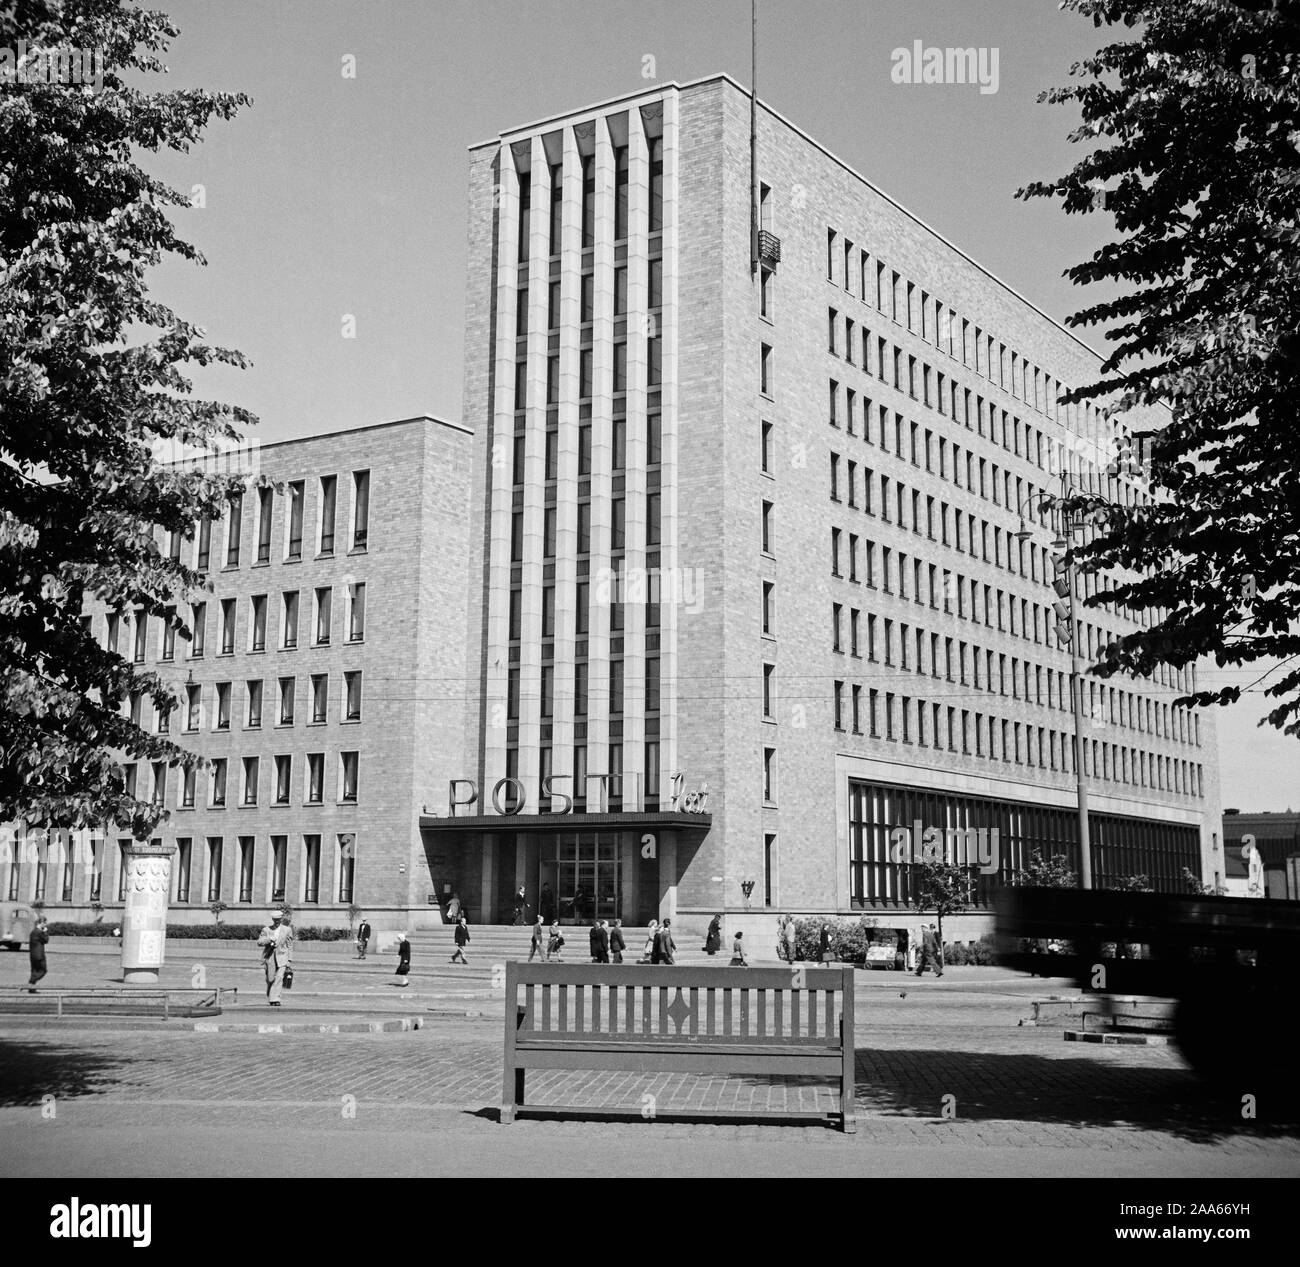 Helsinki 1947, Postitalo, General Post Office, the headquarters of Finnish postal and telegraph services is situated at the junction between Mannerheimintie and Postikatu. Stock Photo